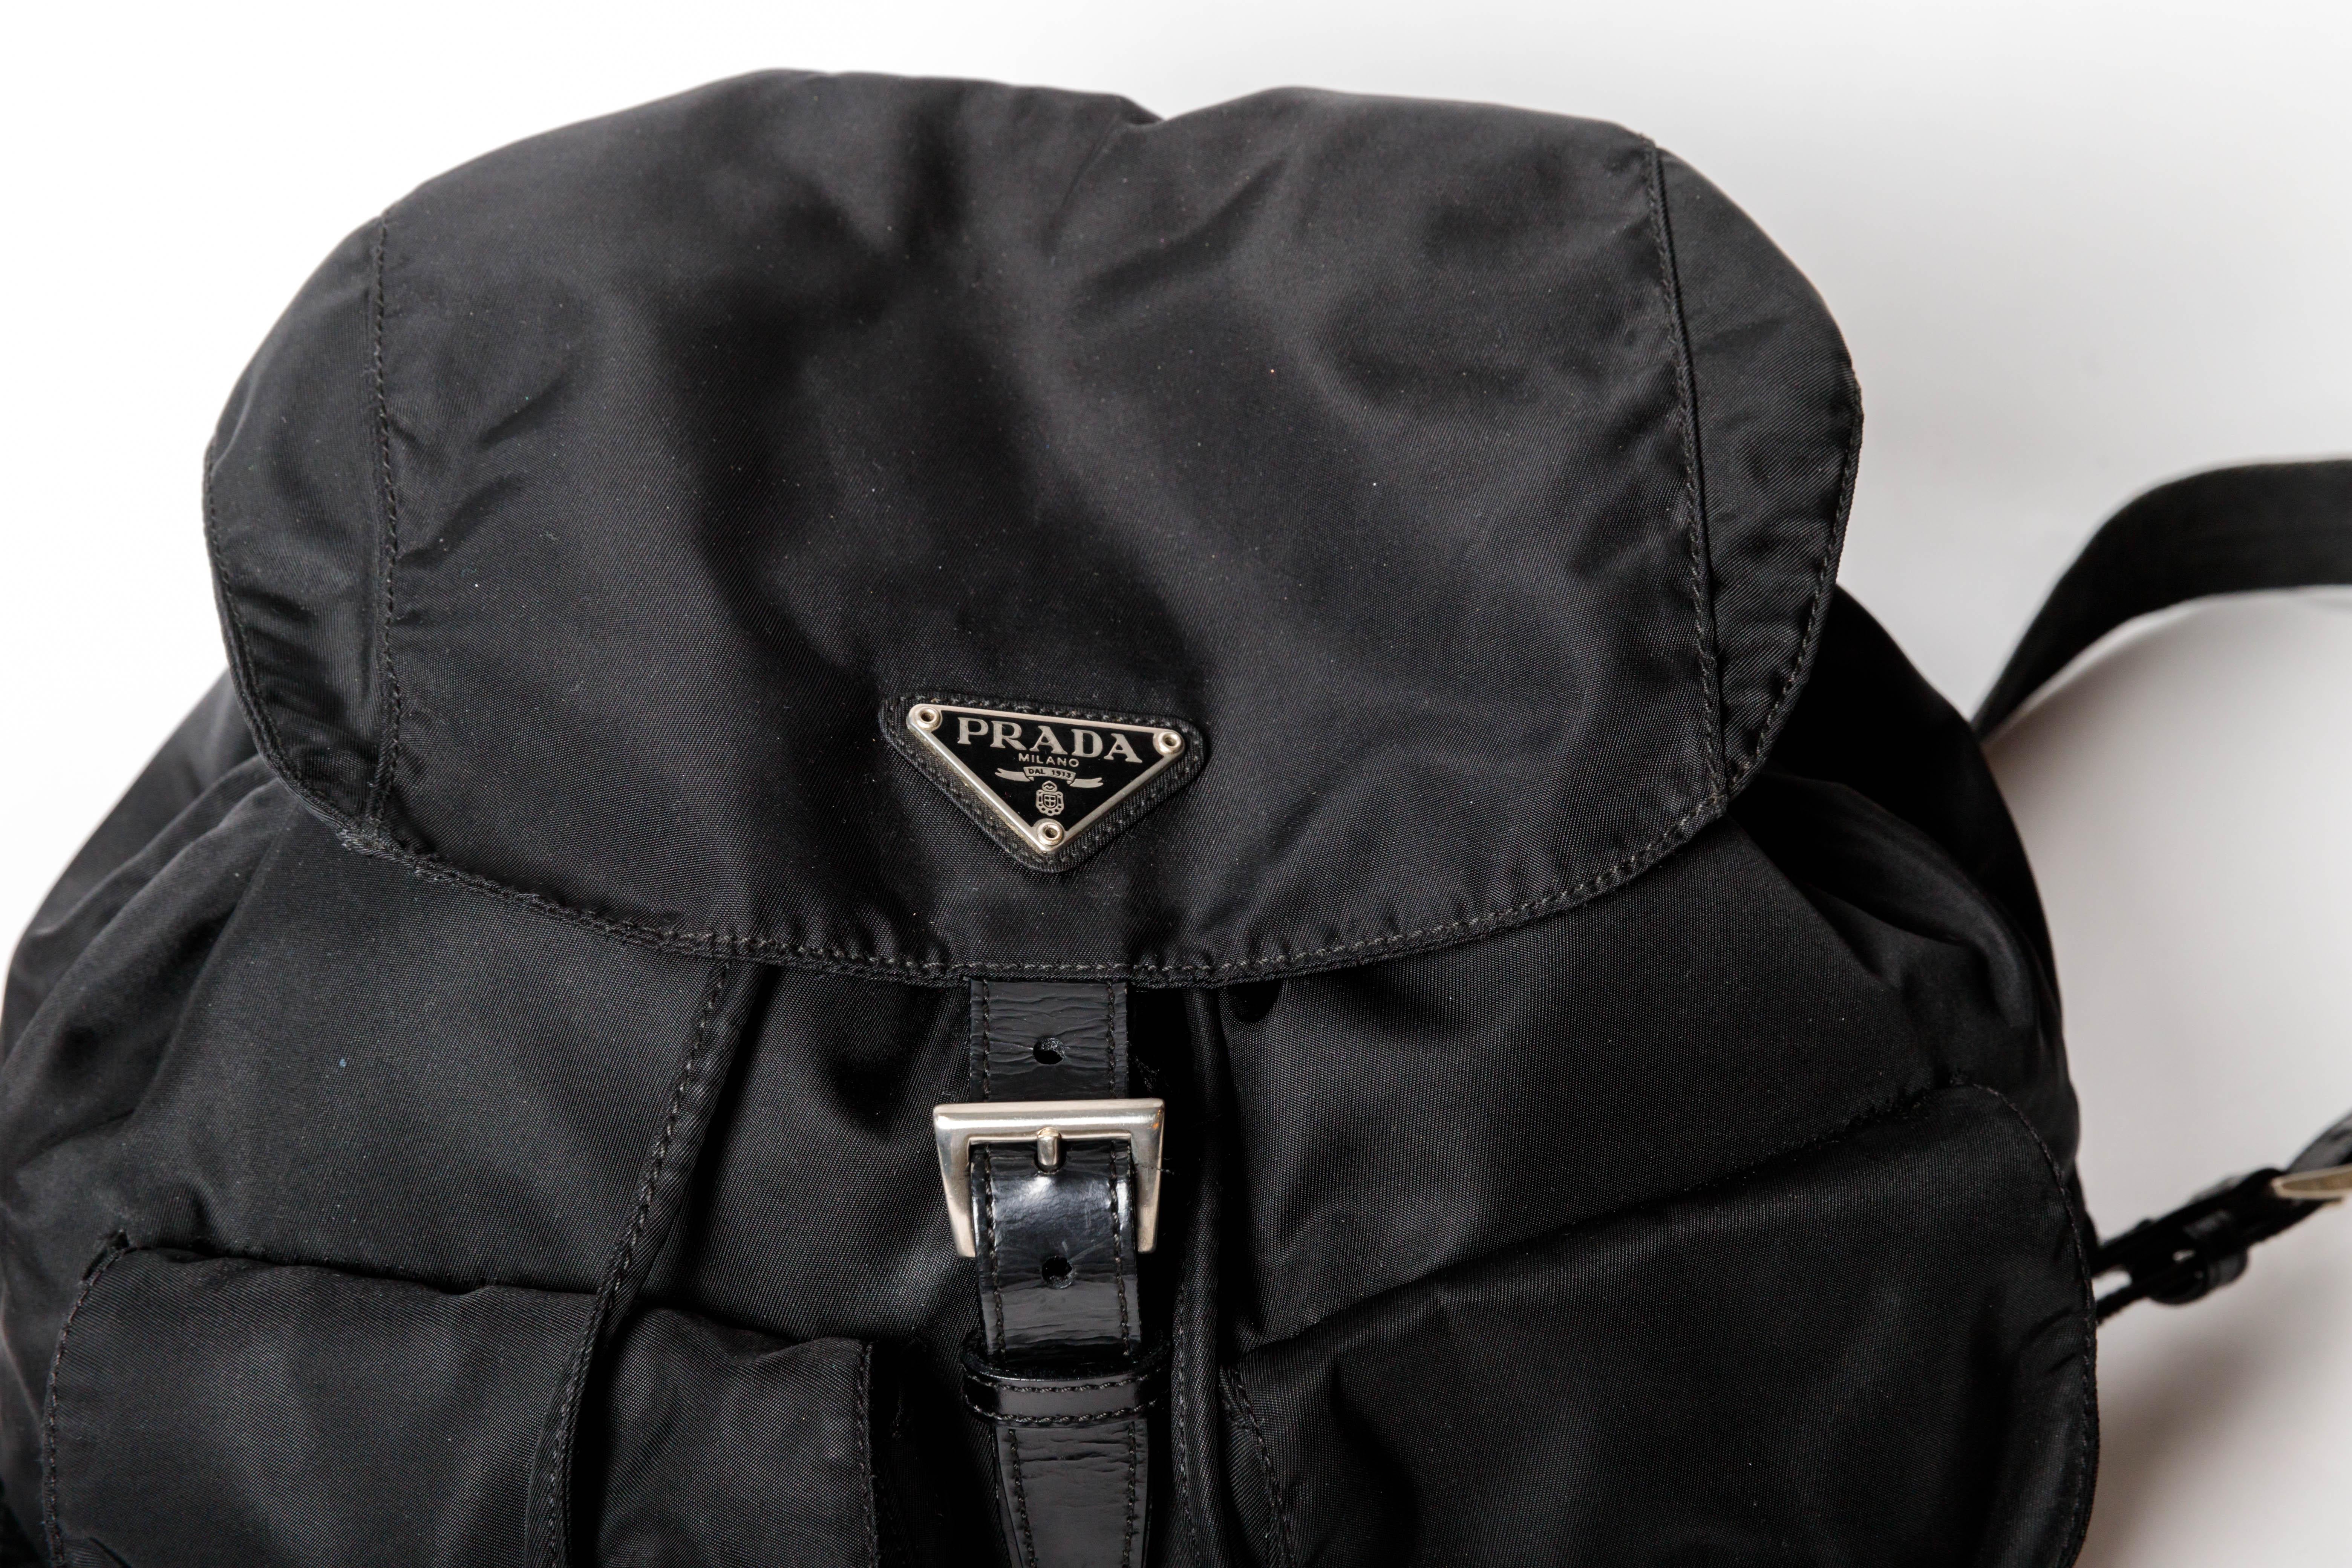 Prada Nylon Backpack with Leather Trim and Silver Buckles In Good Condition For Sale In Westhampton Beach, NY